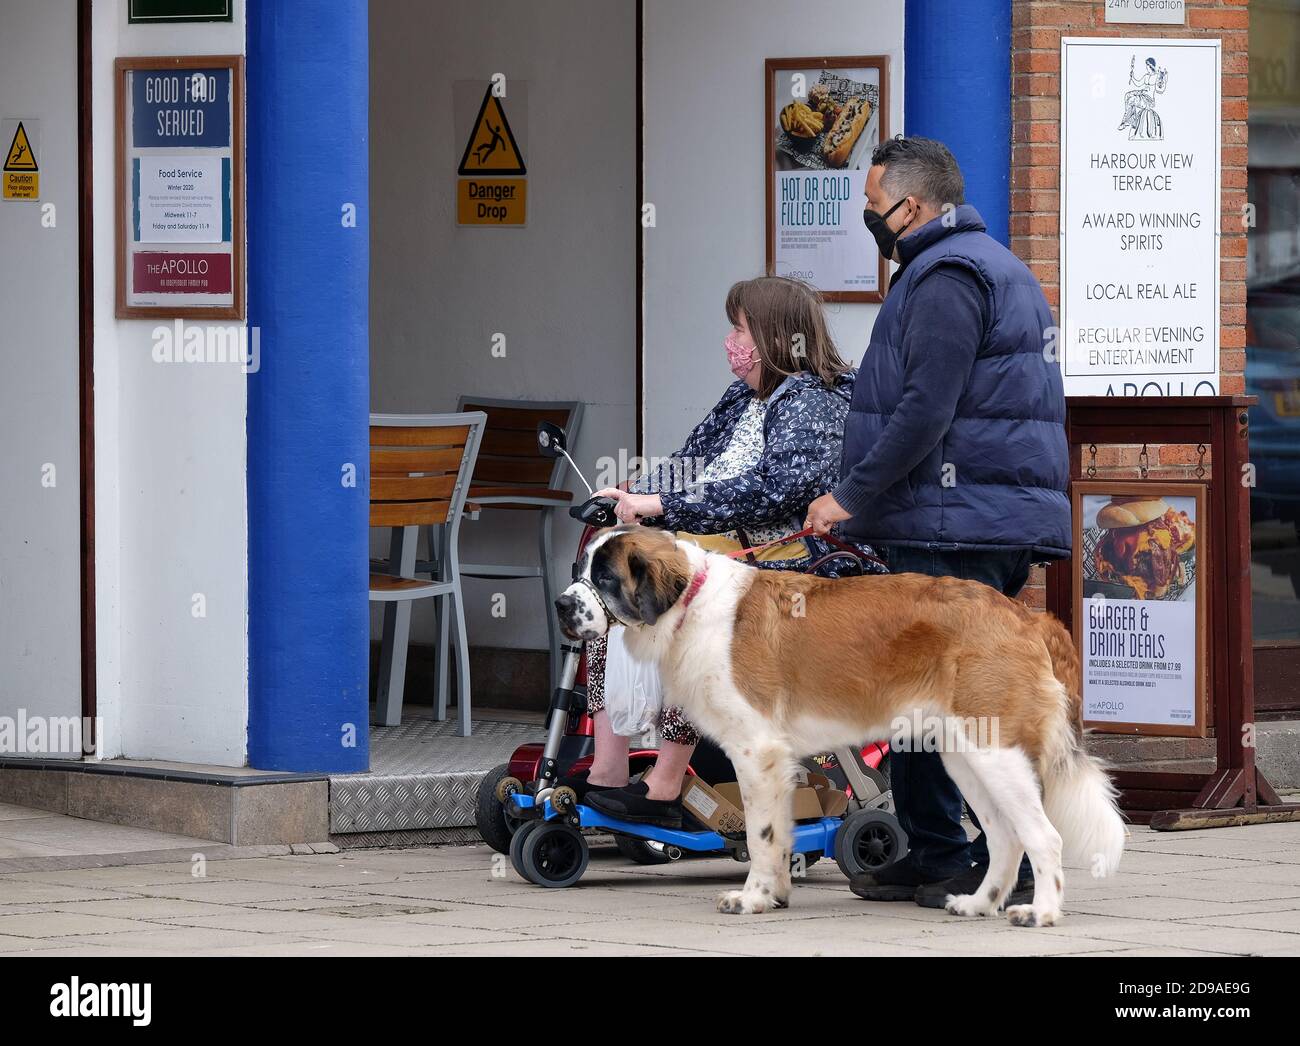 MAN AND WOMAN WITH DOG AND INVALID SCOOTER OUTSIDE A PUBLIC HOUSE. Stock Photo